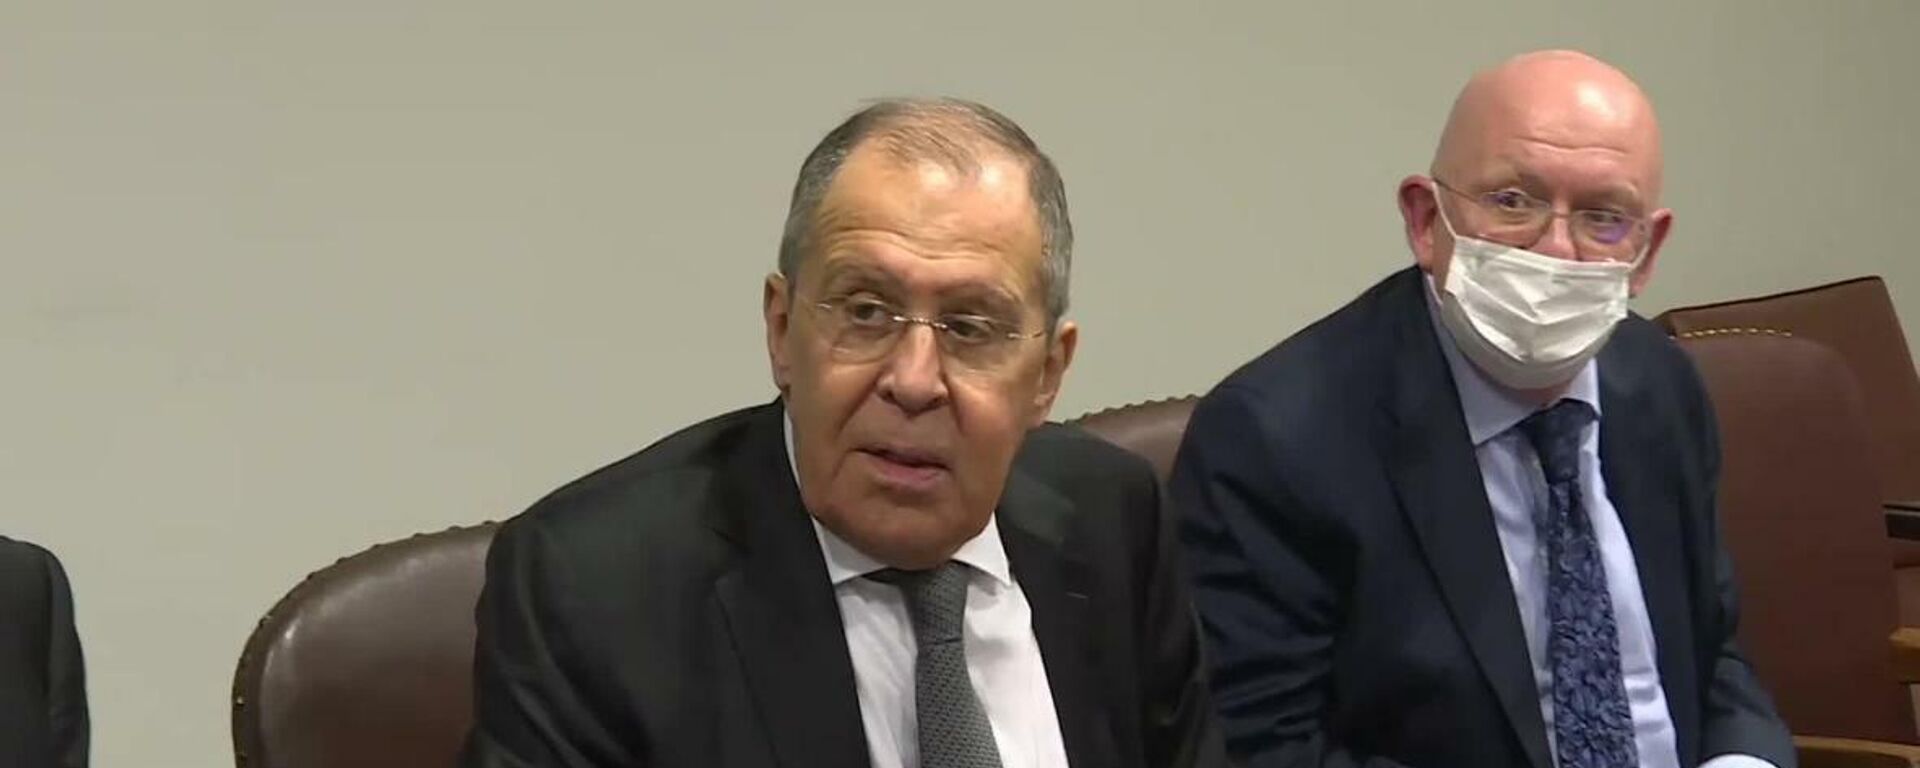 USA: Don't try your luck, Russia won't join NATO – Lavrov in meeting with Stoltenberg - Sputnik Moldova-România, 1920, 23.09.2021